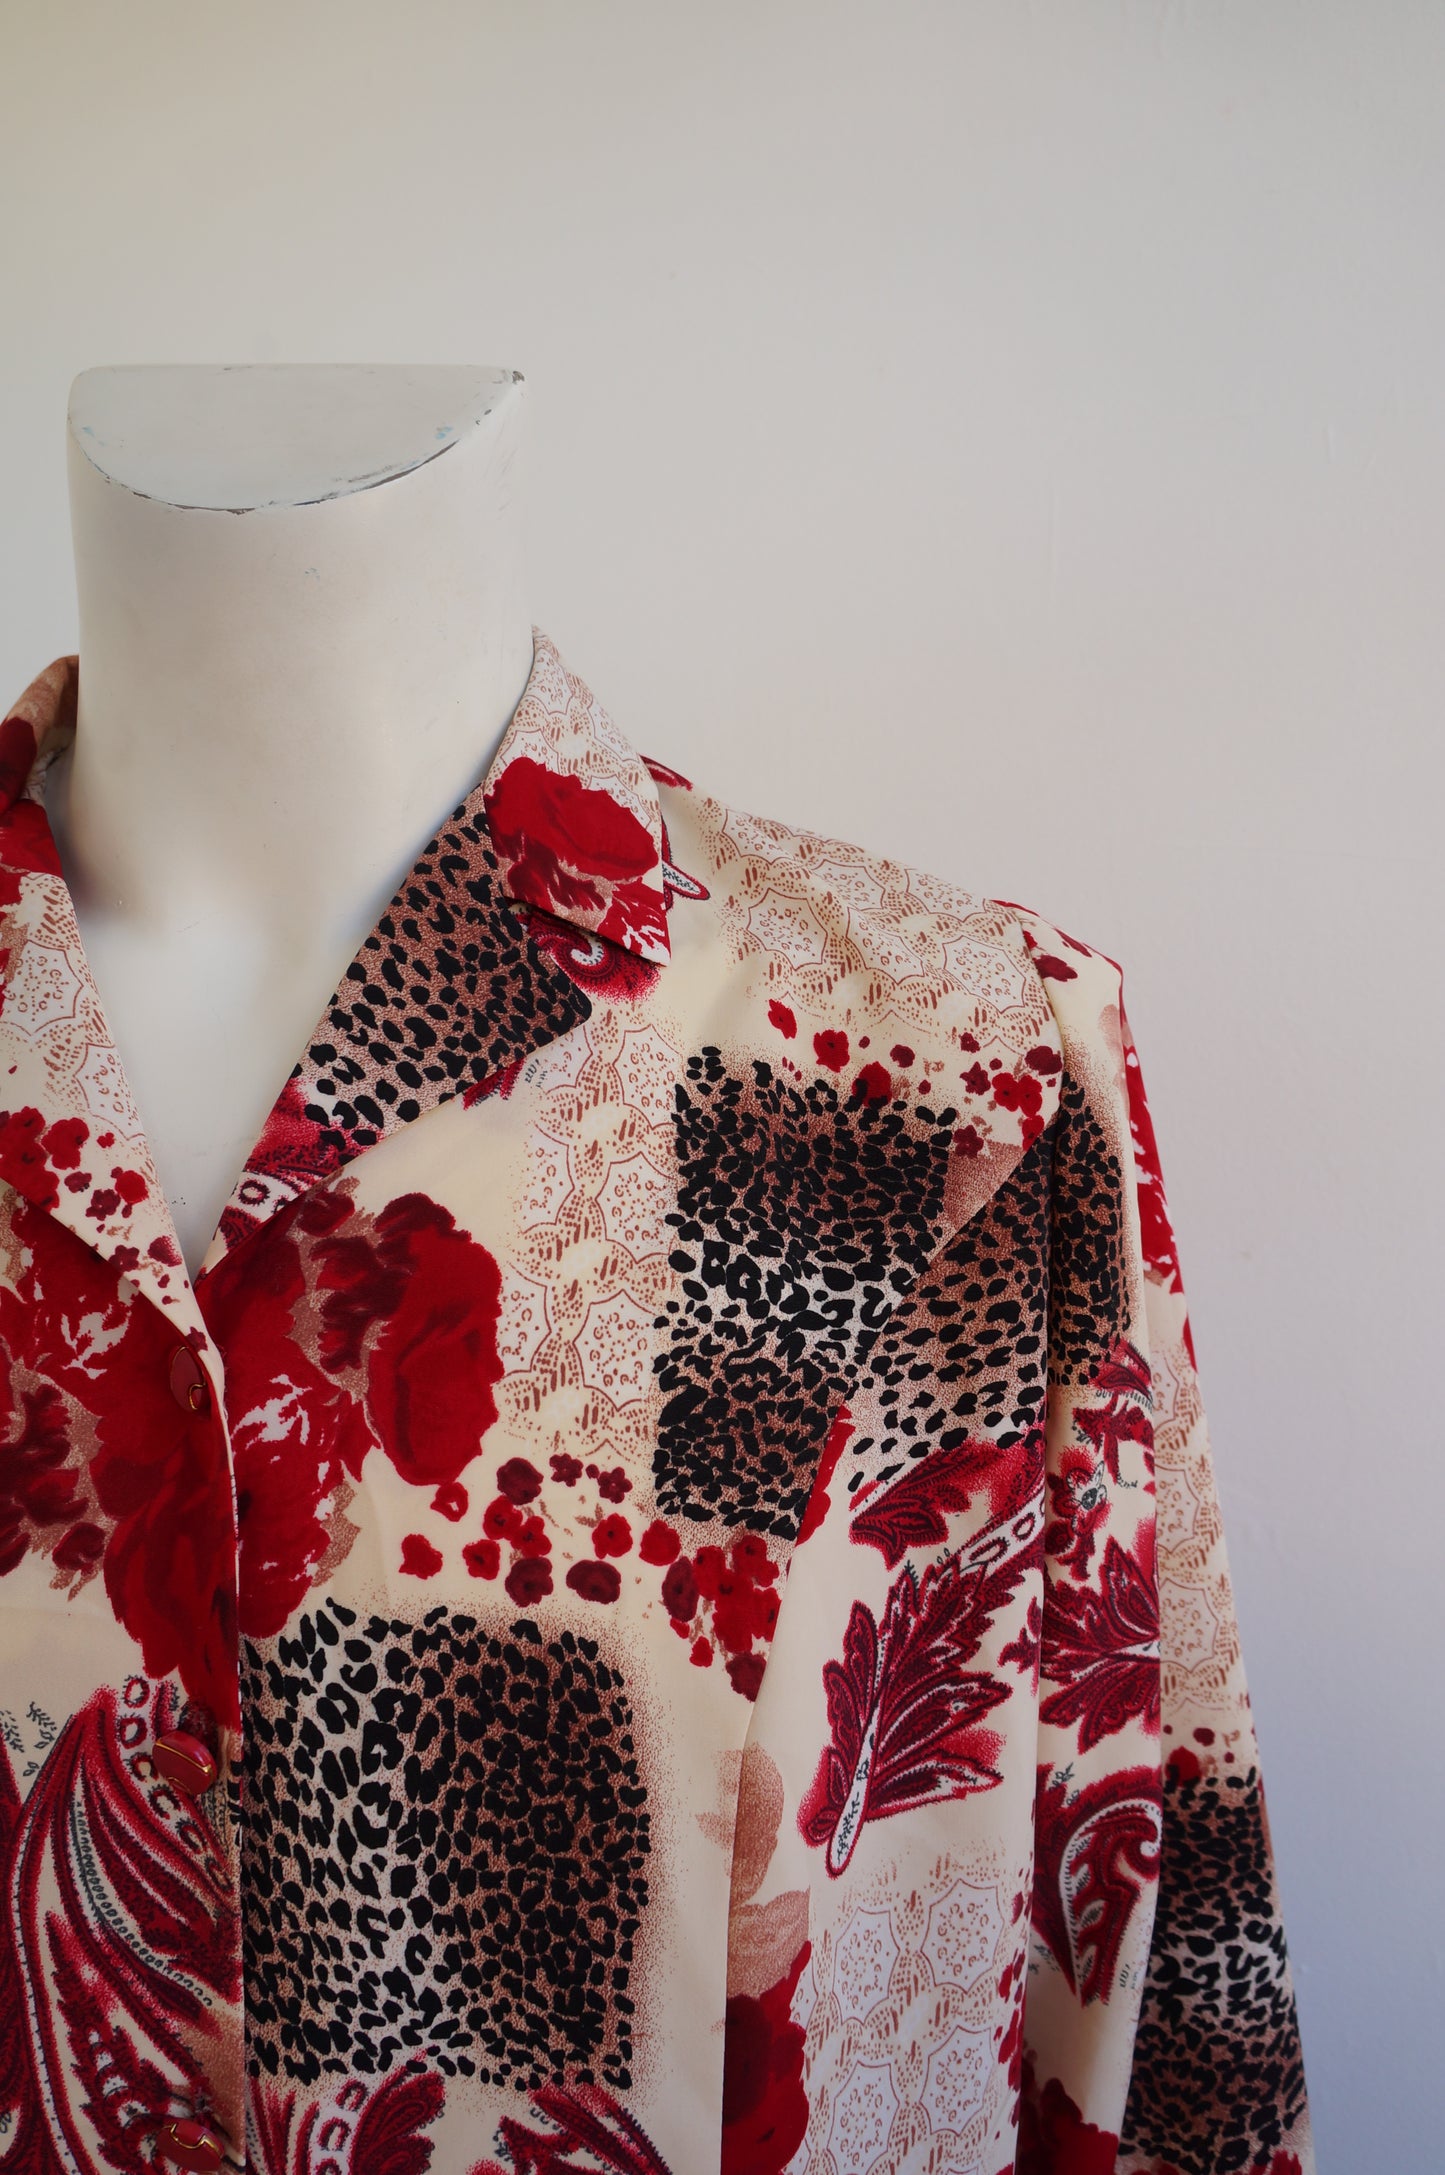 Leopard shirt red roses